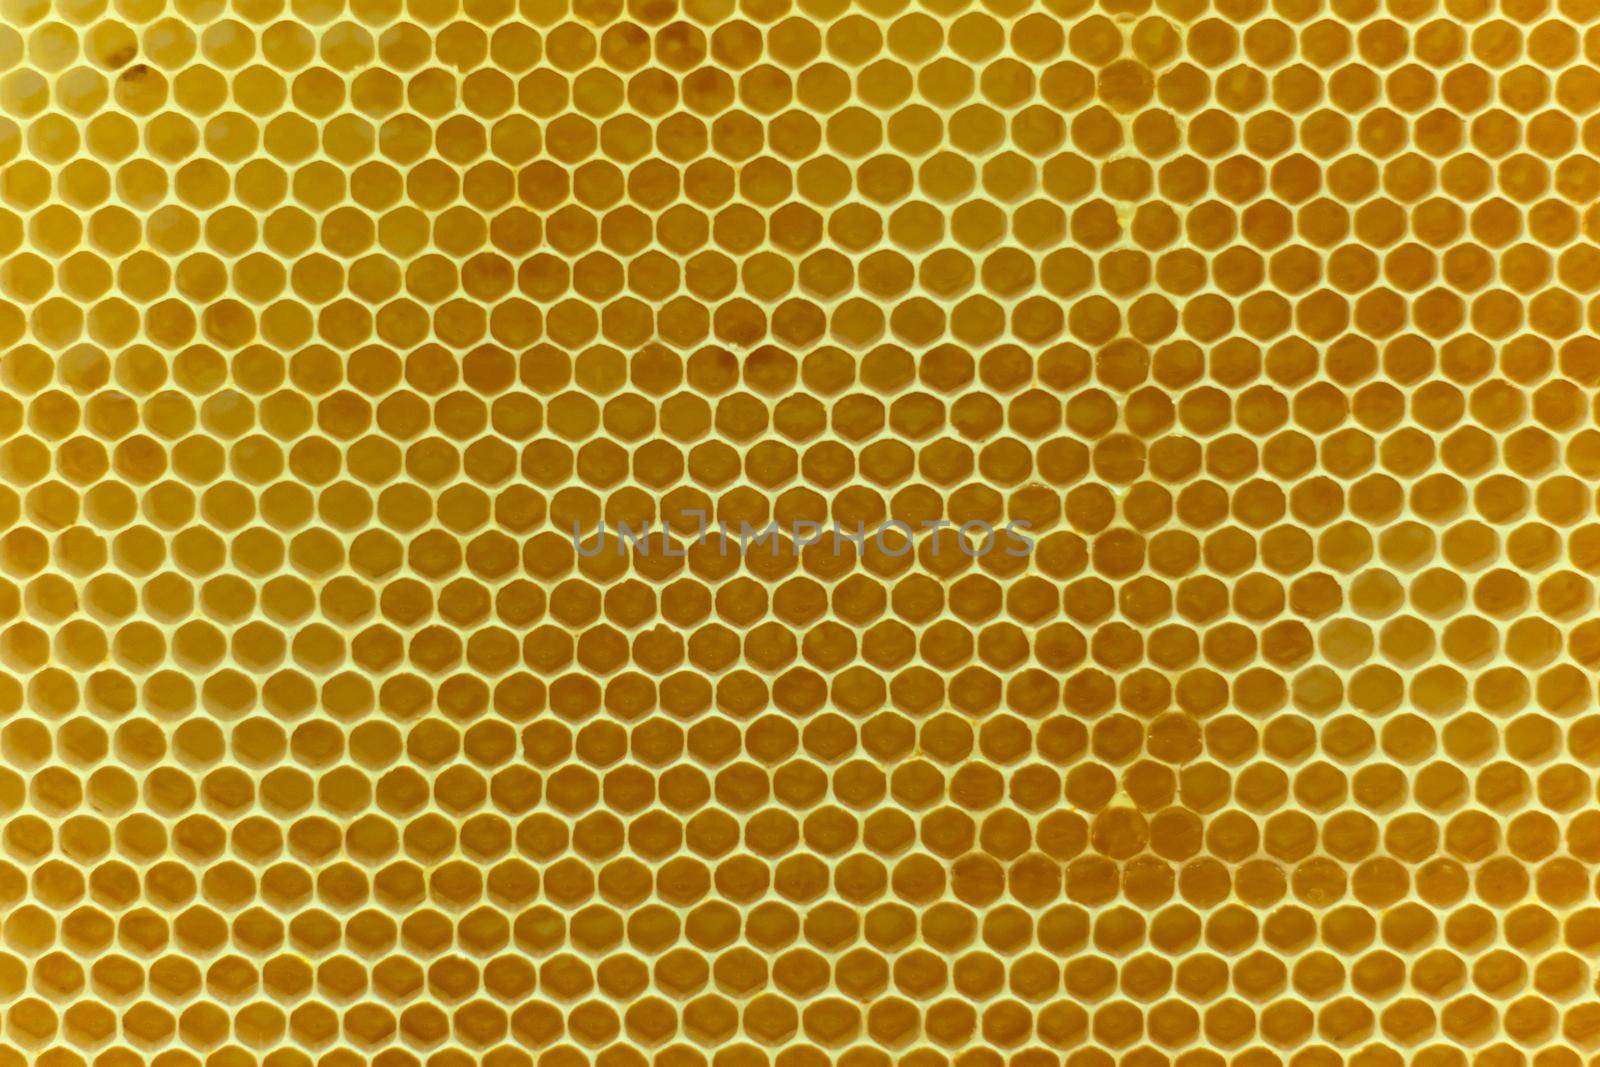 Real natural honeycombs made from yellow beewax by PiLens